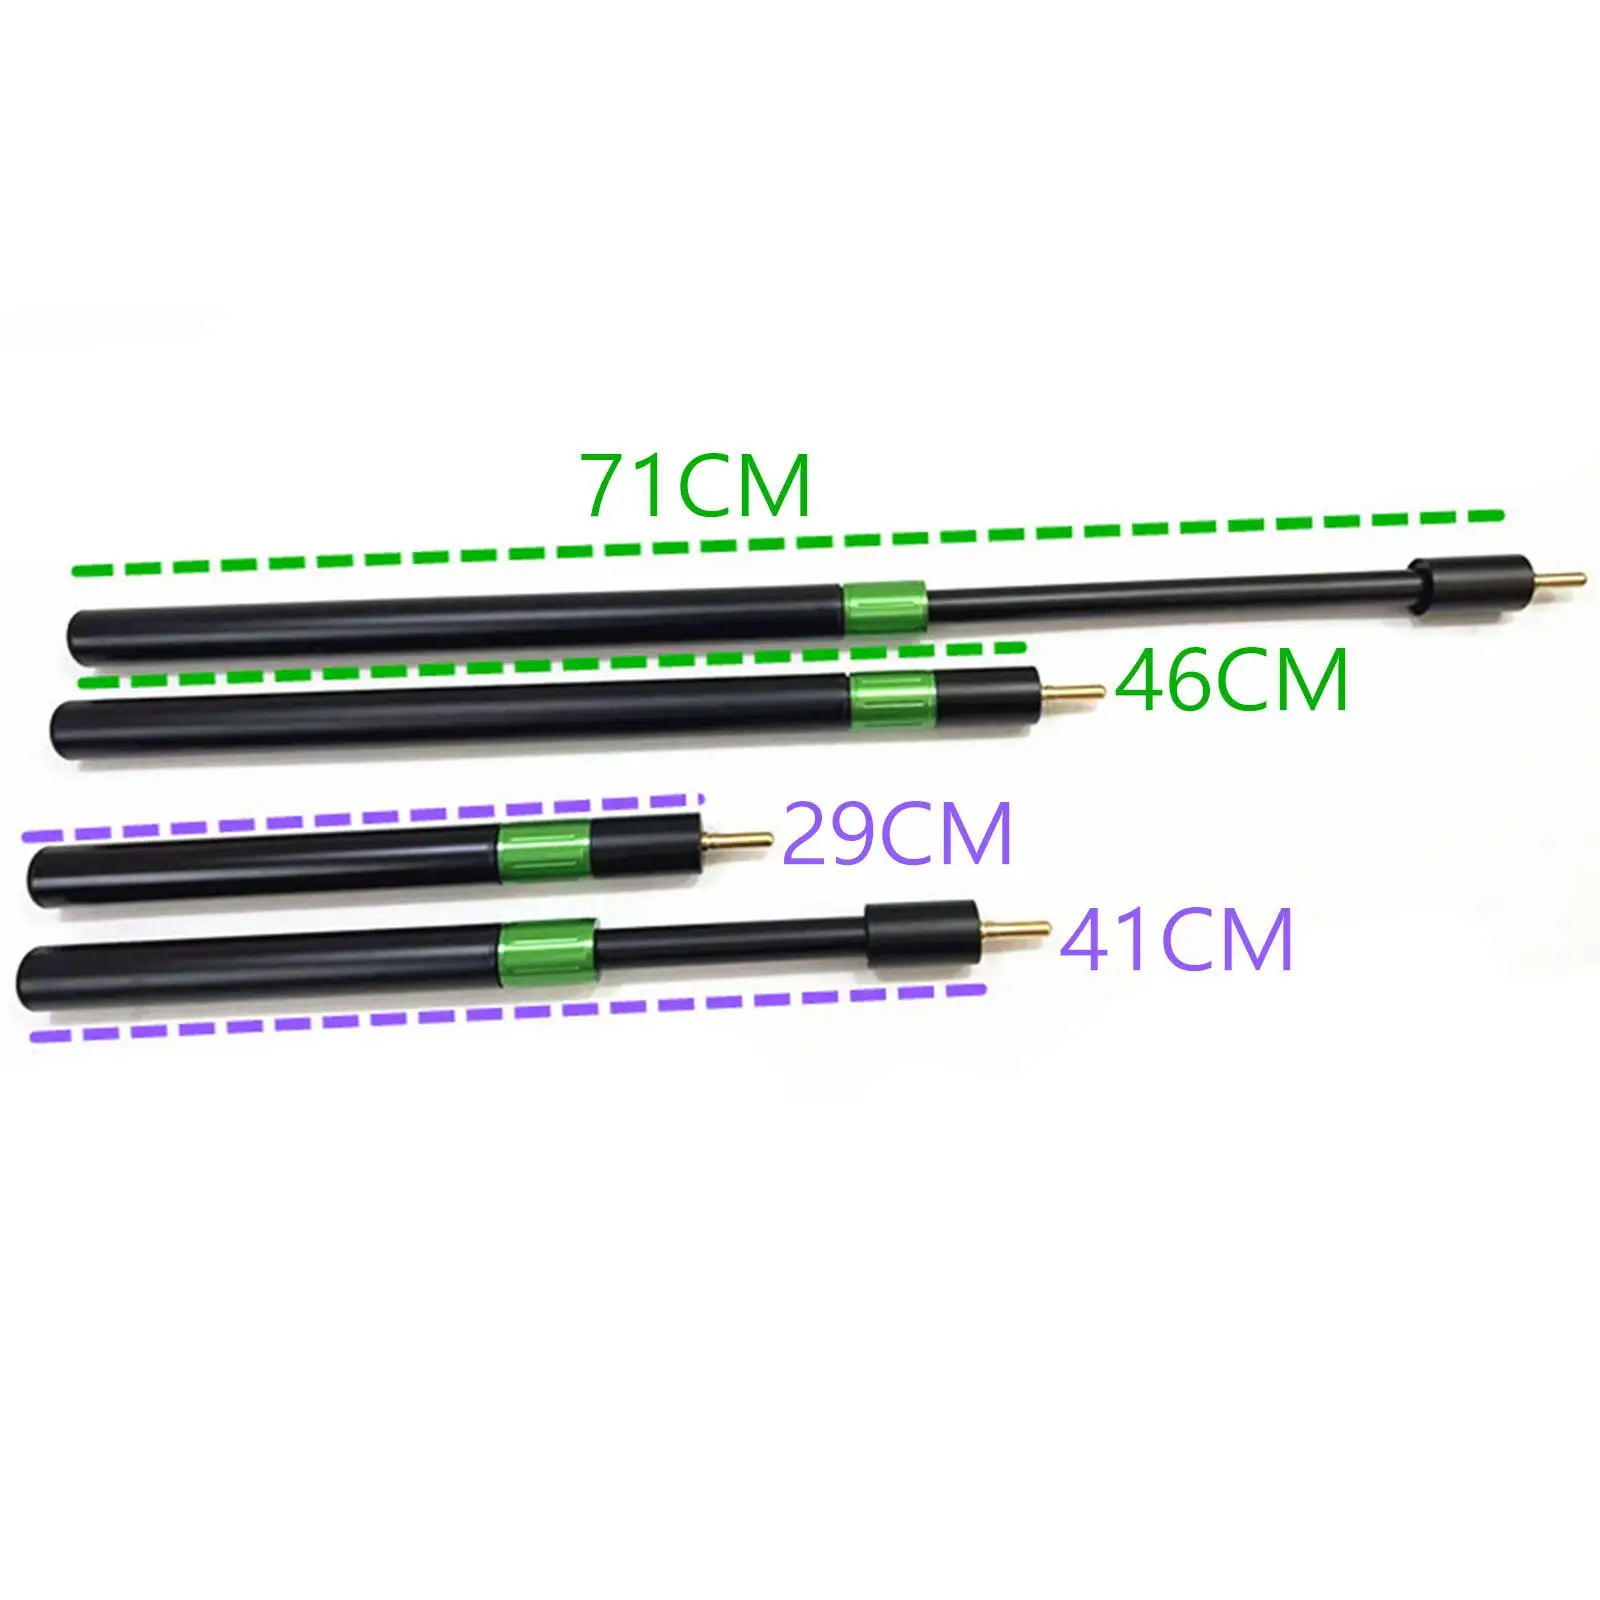 2 Pieces Telescopic Pool Cue Extender Billiards Pool Cue Extension Professional Ultralight Durable Cue Lengthener for Athlete